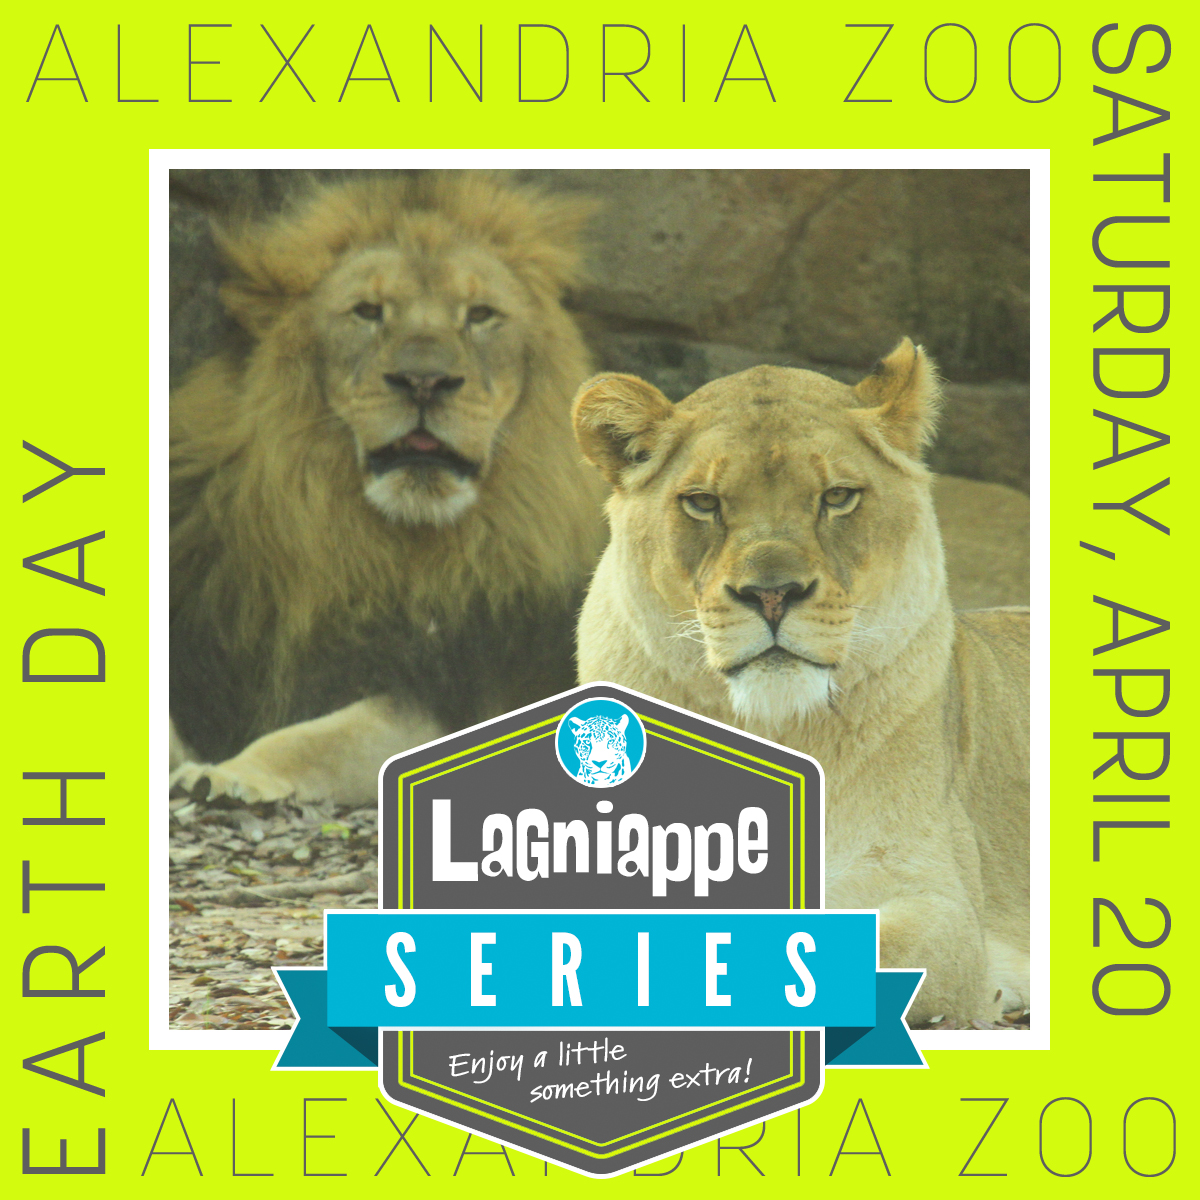 Lagniappe Series logo with lions